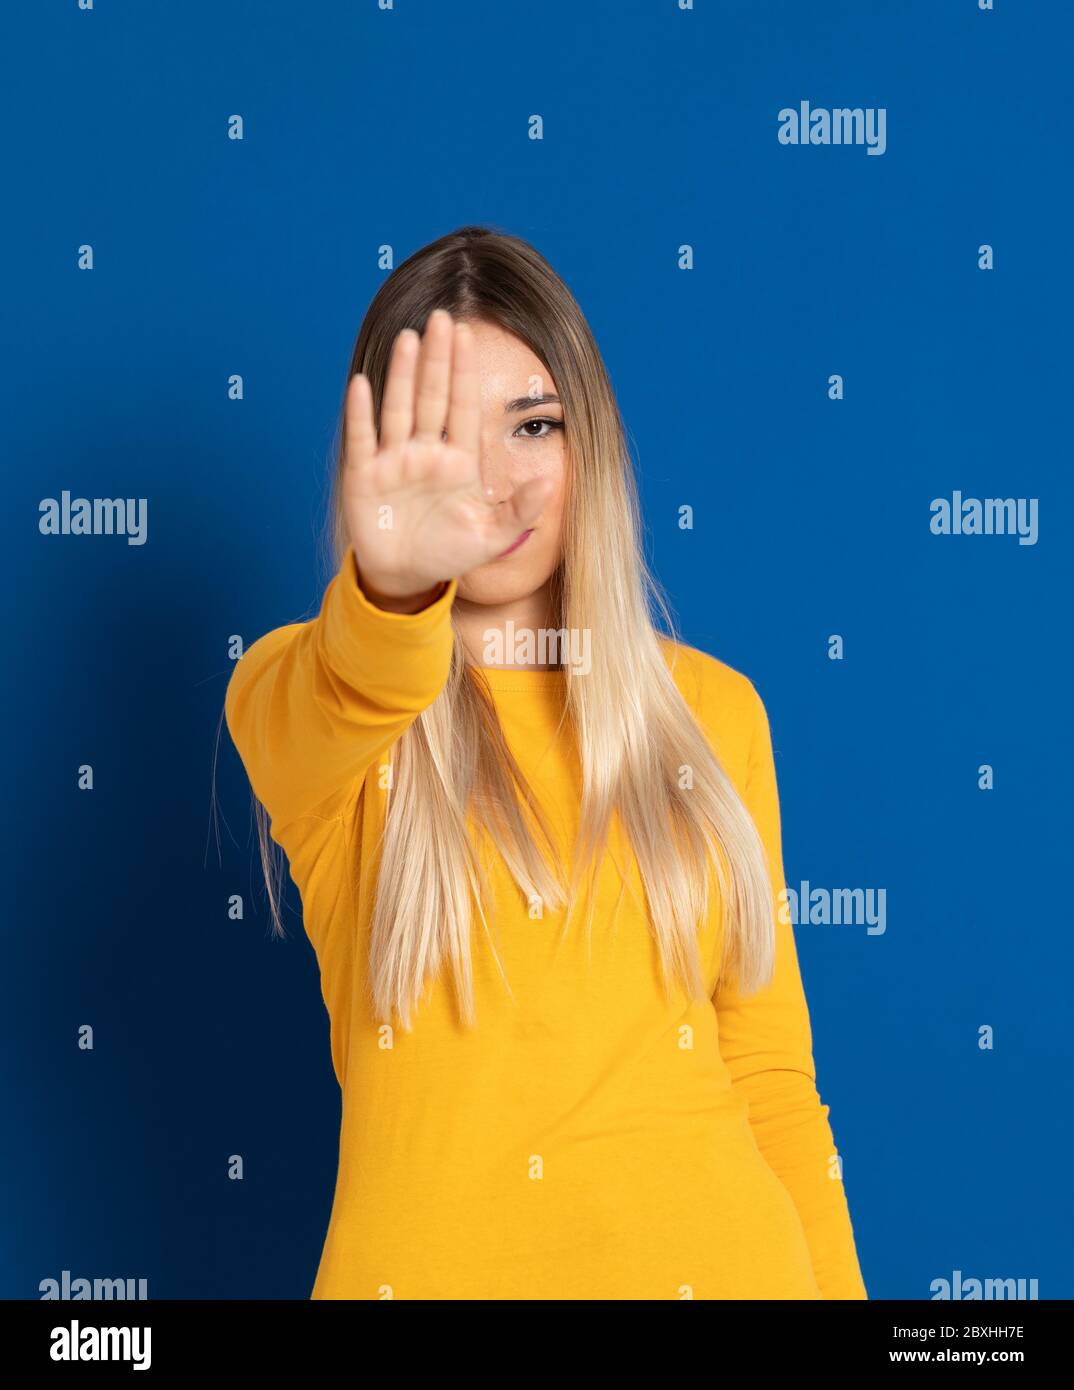 Blonde girl wearing a yellow T-shirt on a blue background Stock Photo